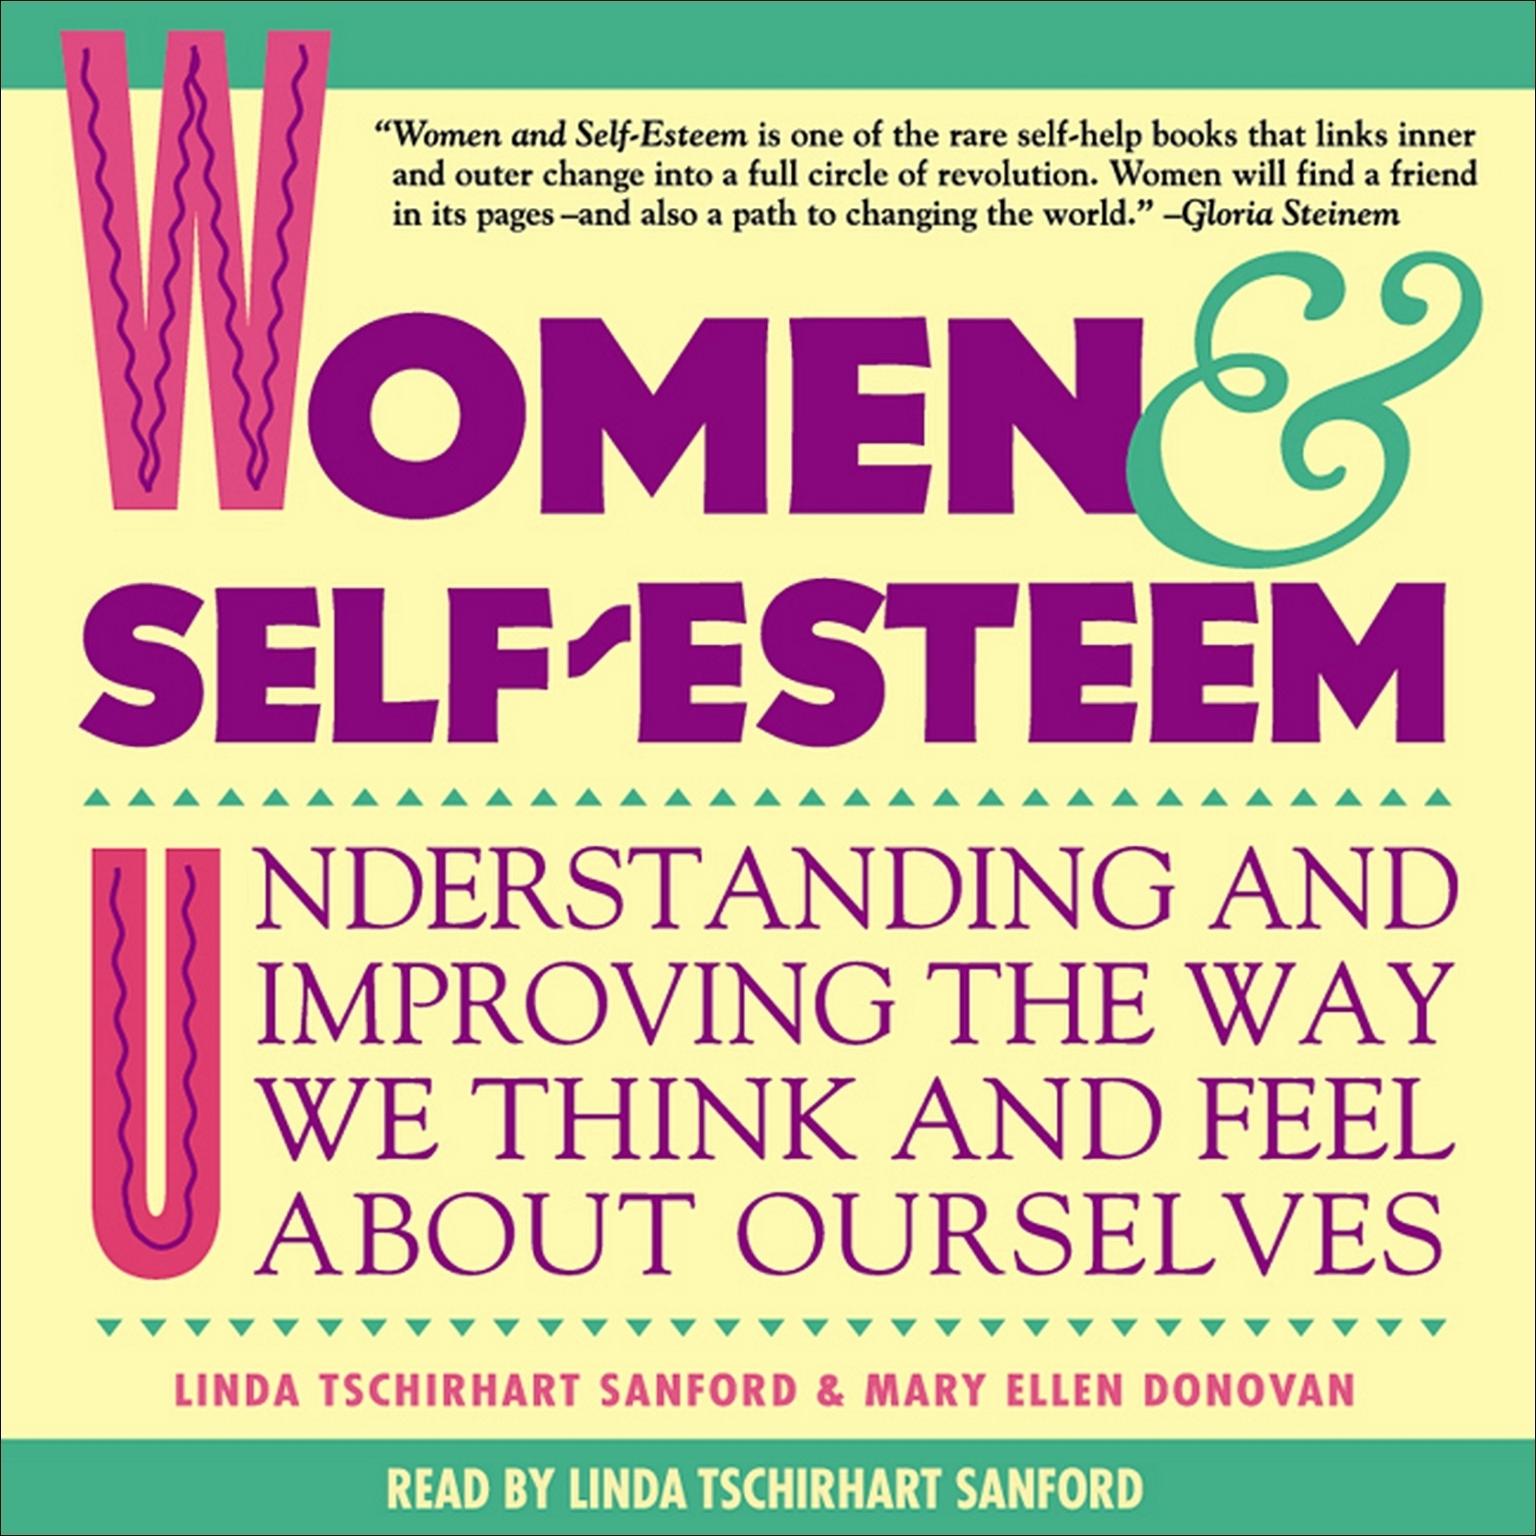 Women & Self-Esteem (Abridged): Understanding and Improving the Way We Think and Feel About Ourselves Audiobook, by Linda Tschirhart Sanford